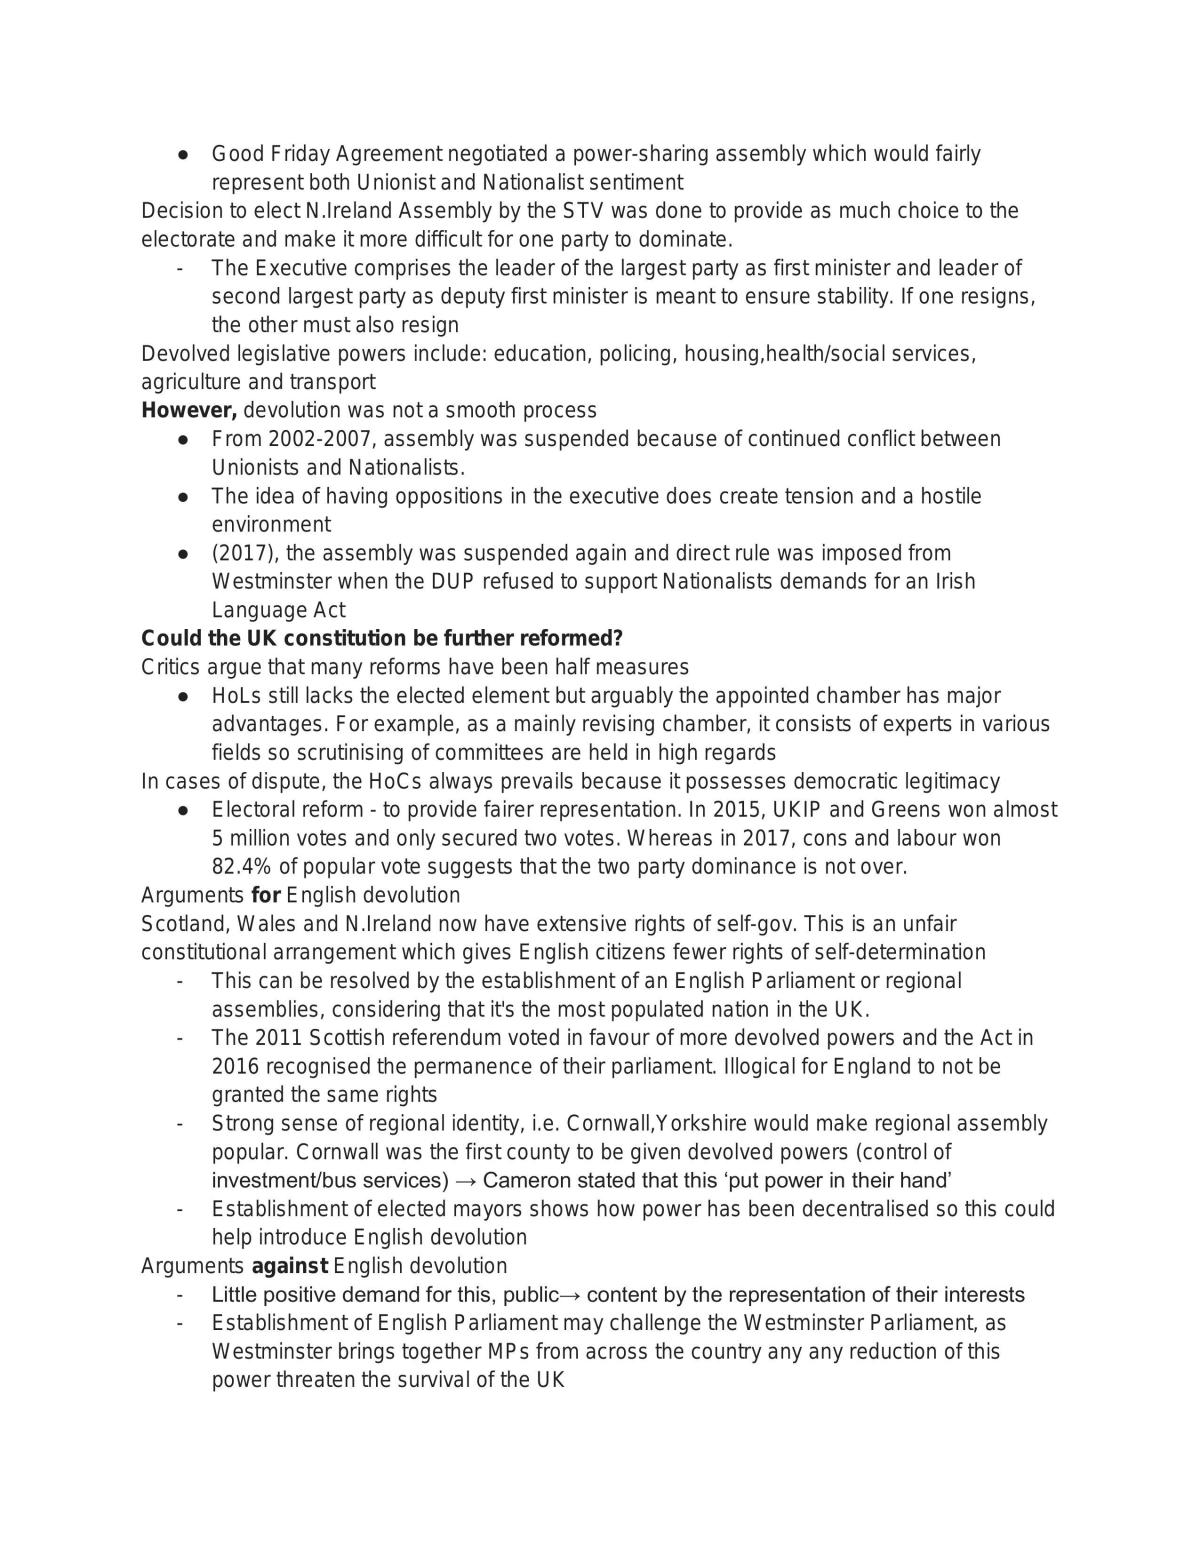 UK constitution - Page 5